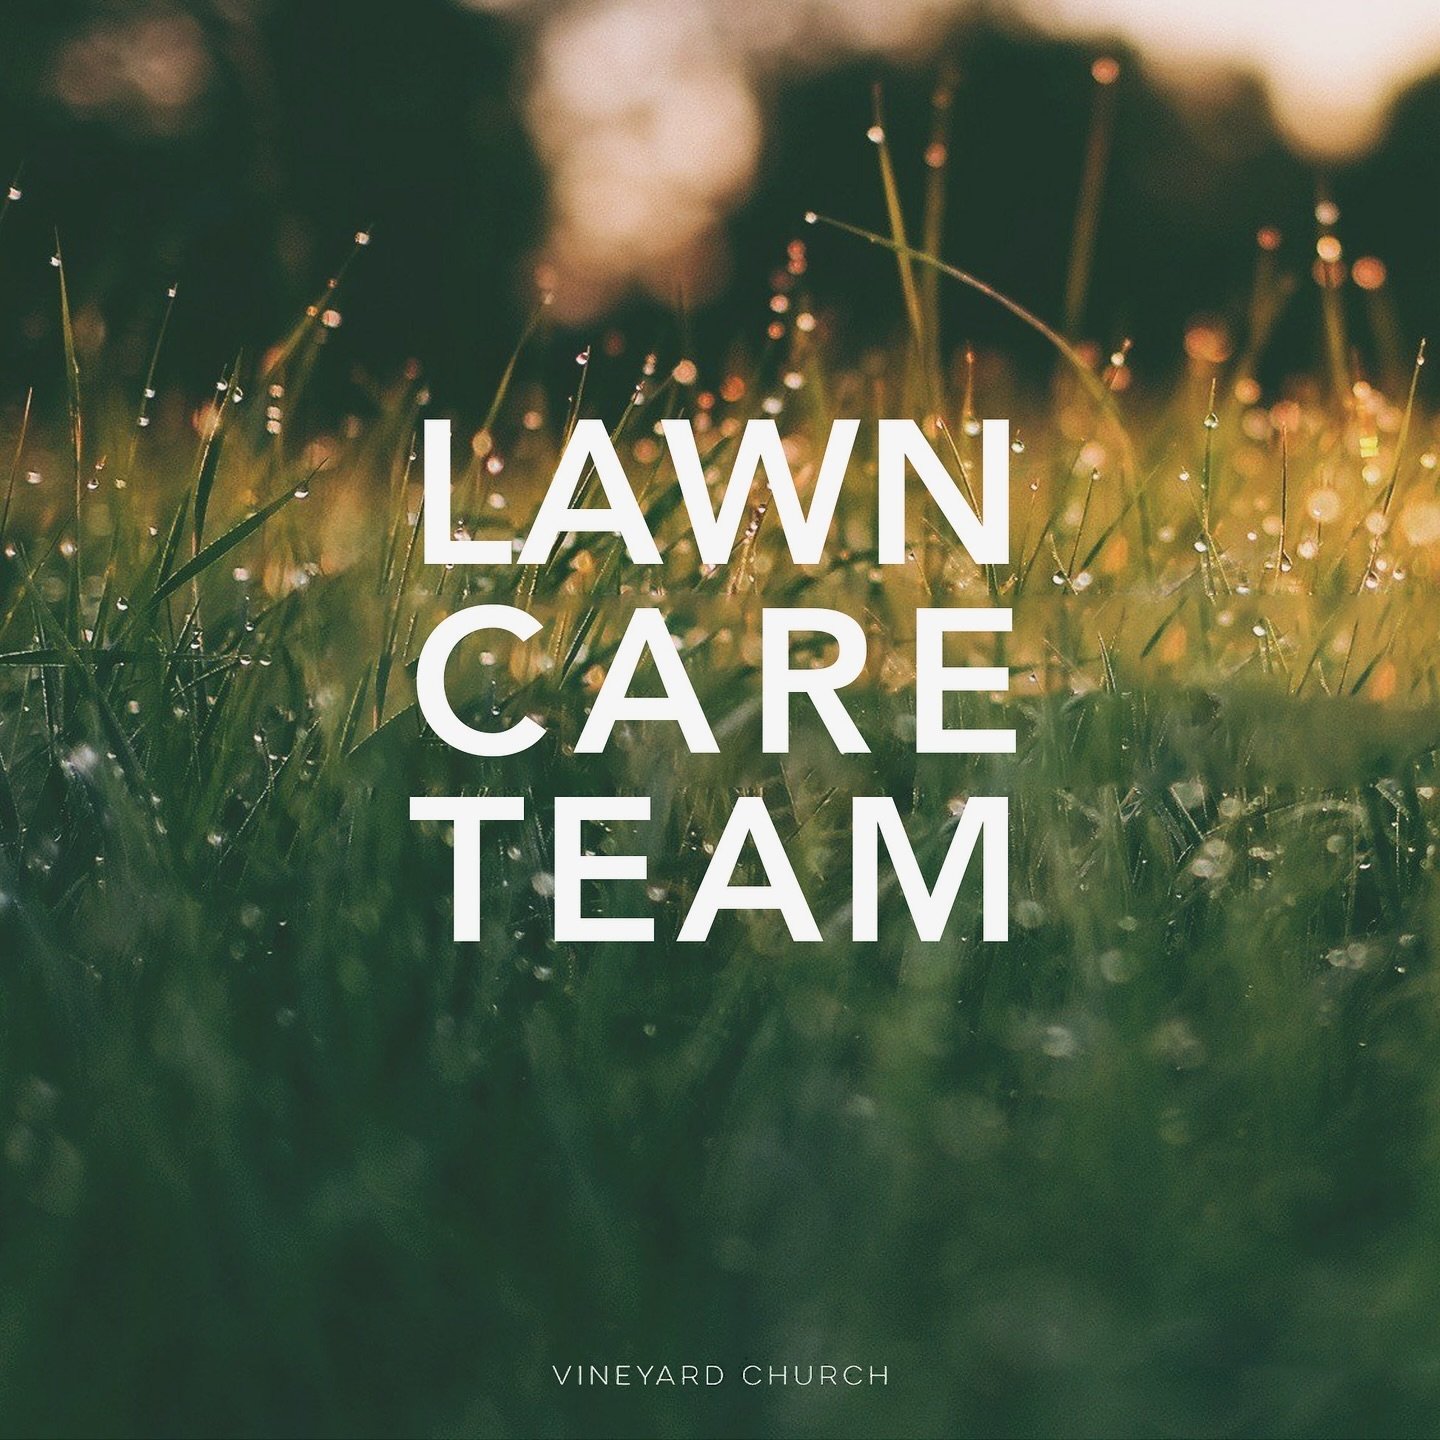 We are looking for volunteers to use our uber-cool zero-turn riding mower this summer and keep the Vineyard Church lawns looking amazing! Mowing the whole property will take 2-3 hours. We need 8 volunteers, so that each person only needs to mow two o